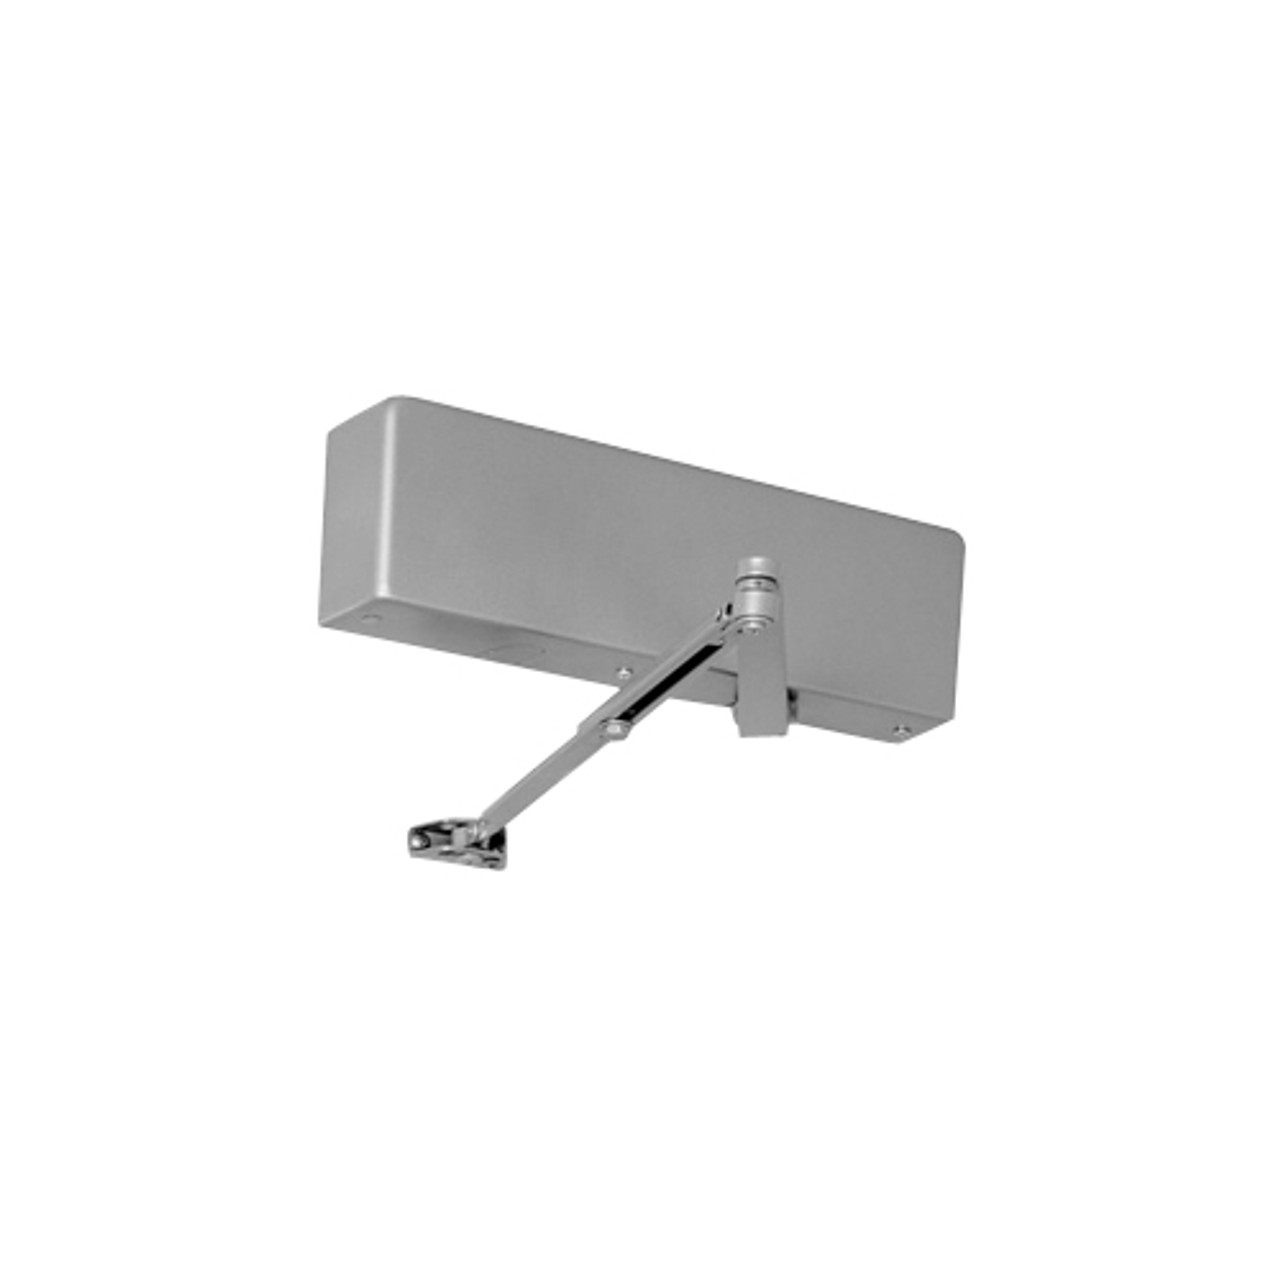 J7500DA-689 Norton 7500 Series Non-Hold Open Institutional Door Closer with Top Jamb Only Reveals 2-3/4 to 7 inch to 150 Degree in Aluminum Finish